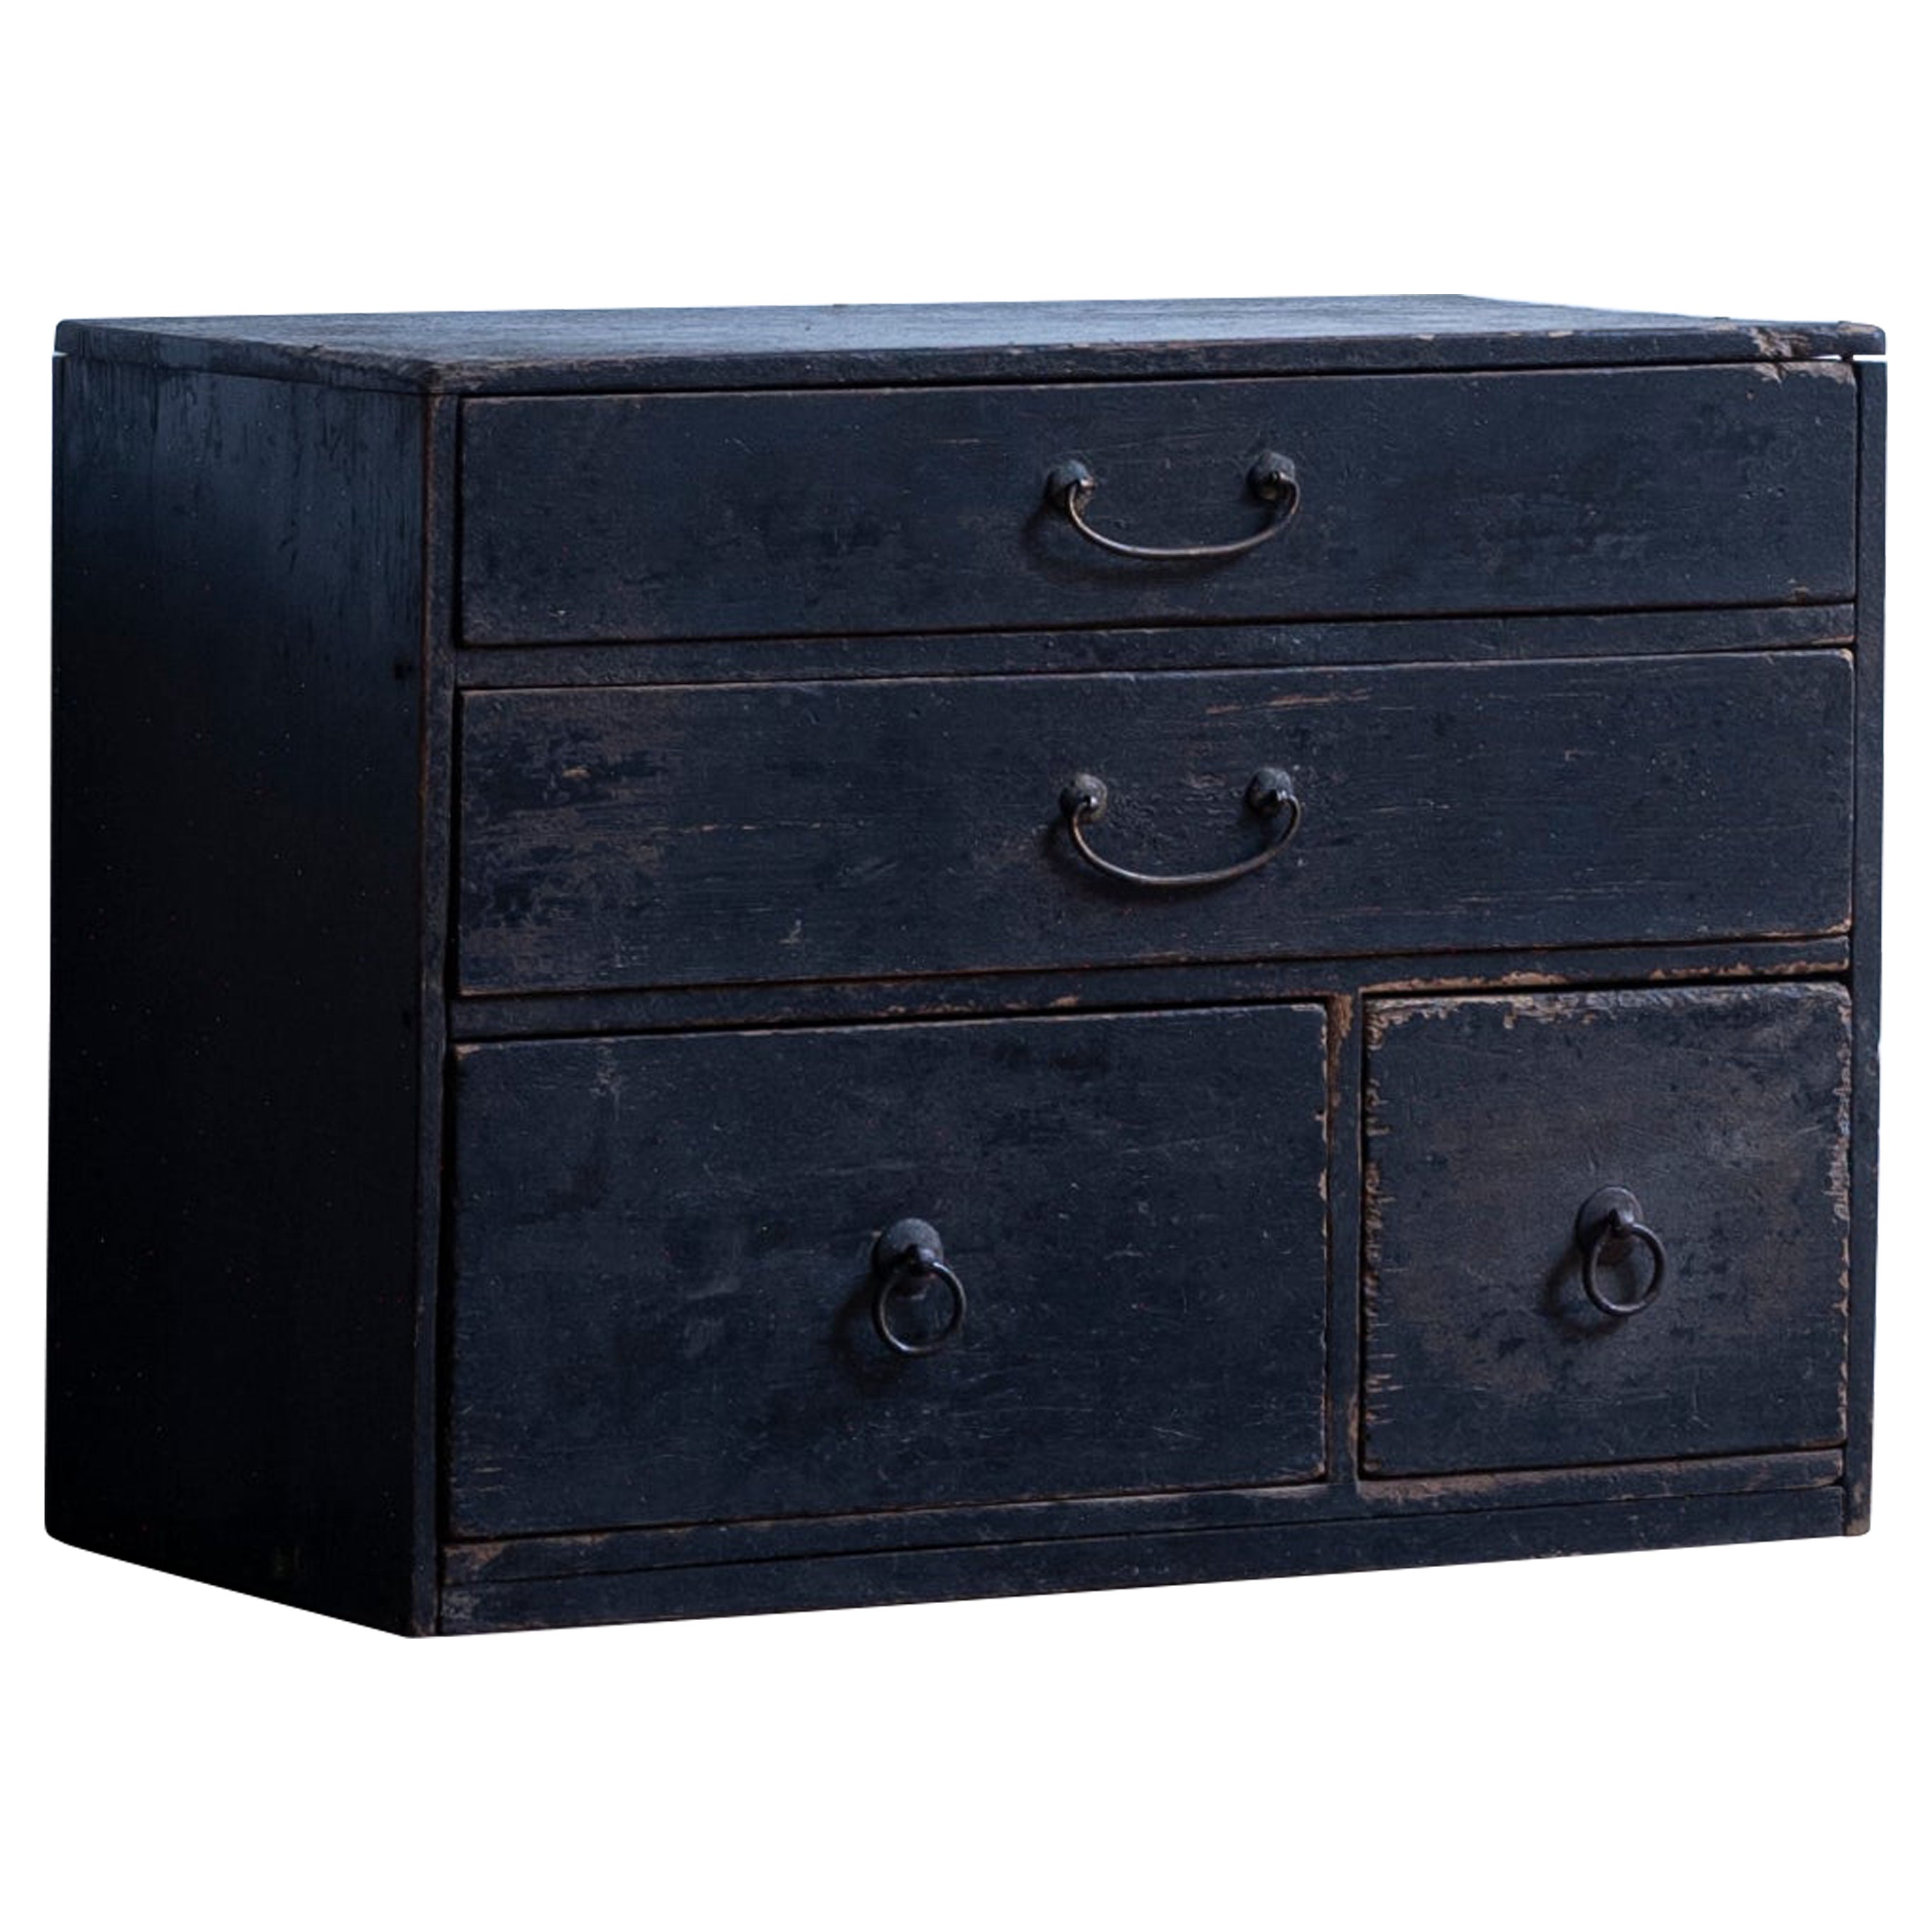 Antique Small Chest of Drawers from 19th Century, Japan